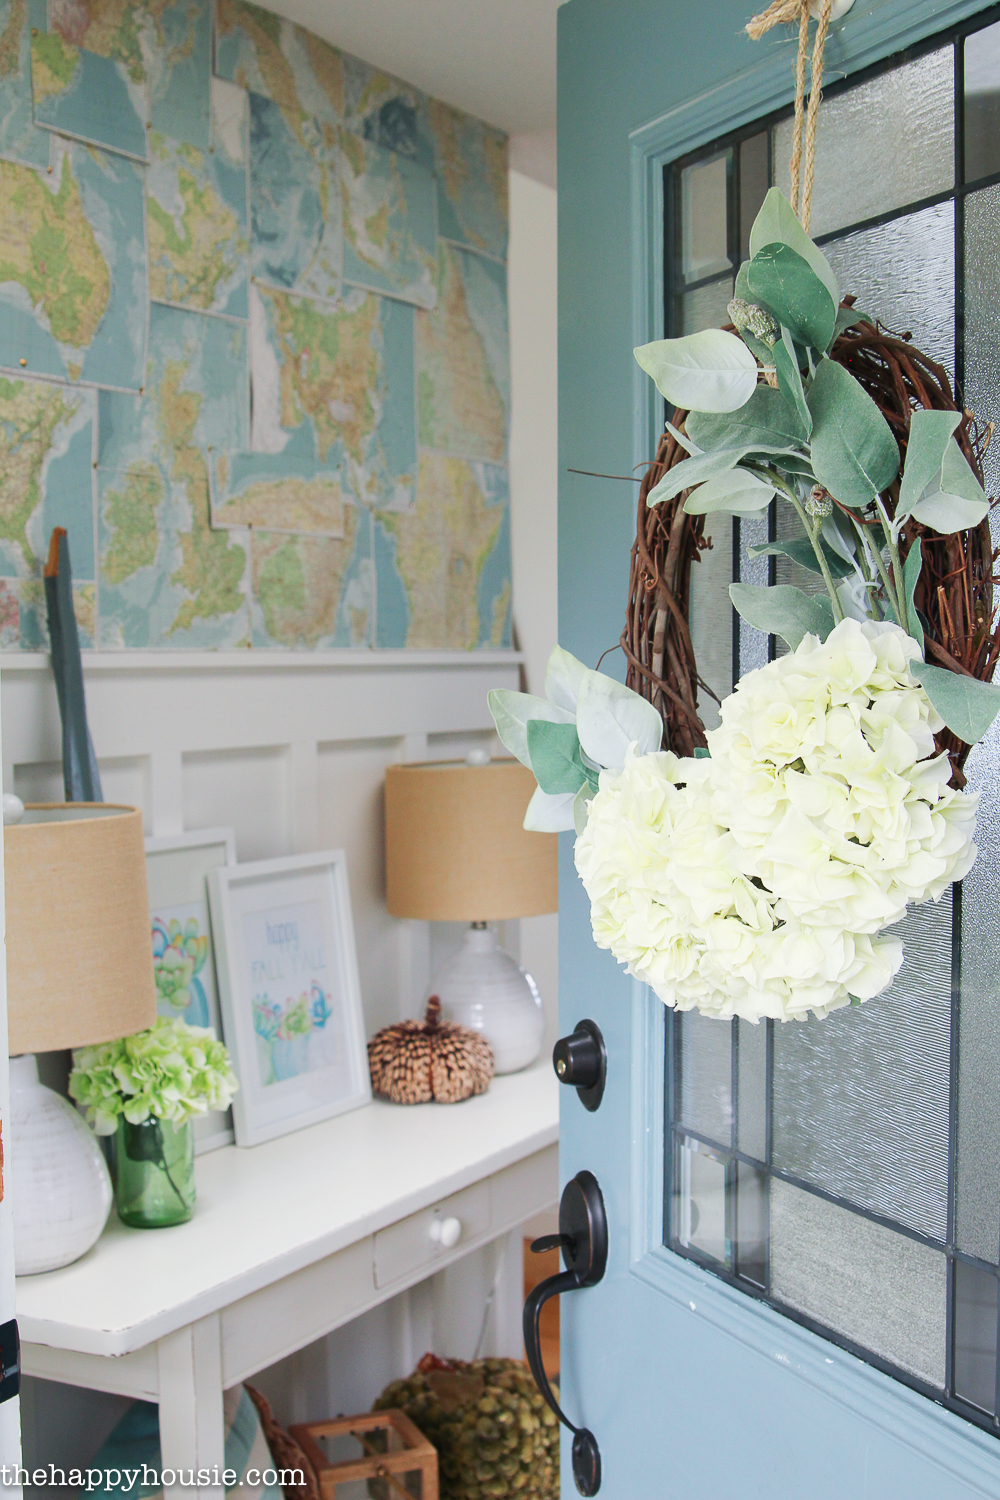 The front door is ajar showing a small white console table and a large map on the wall.